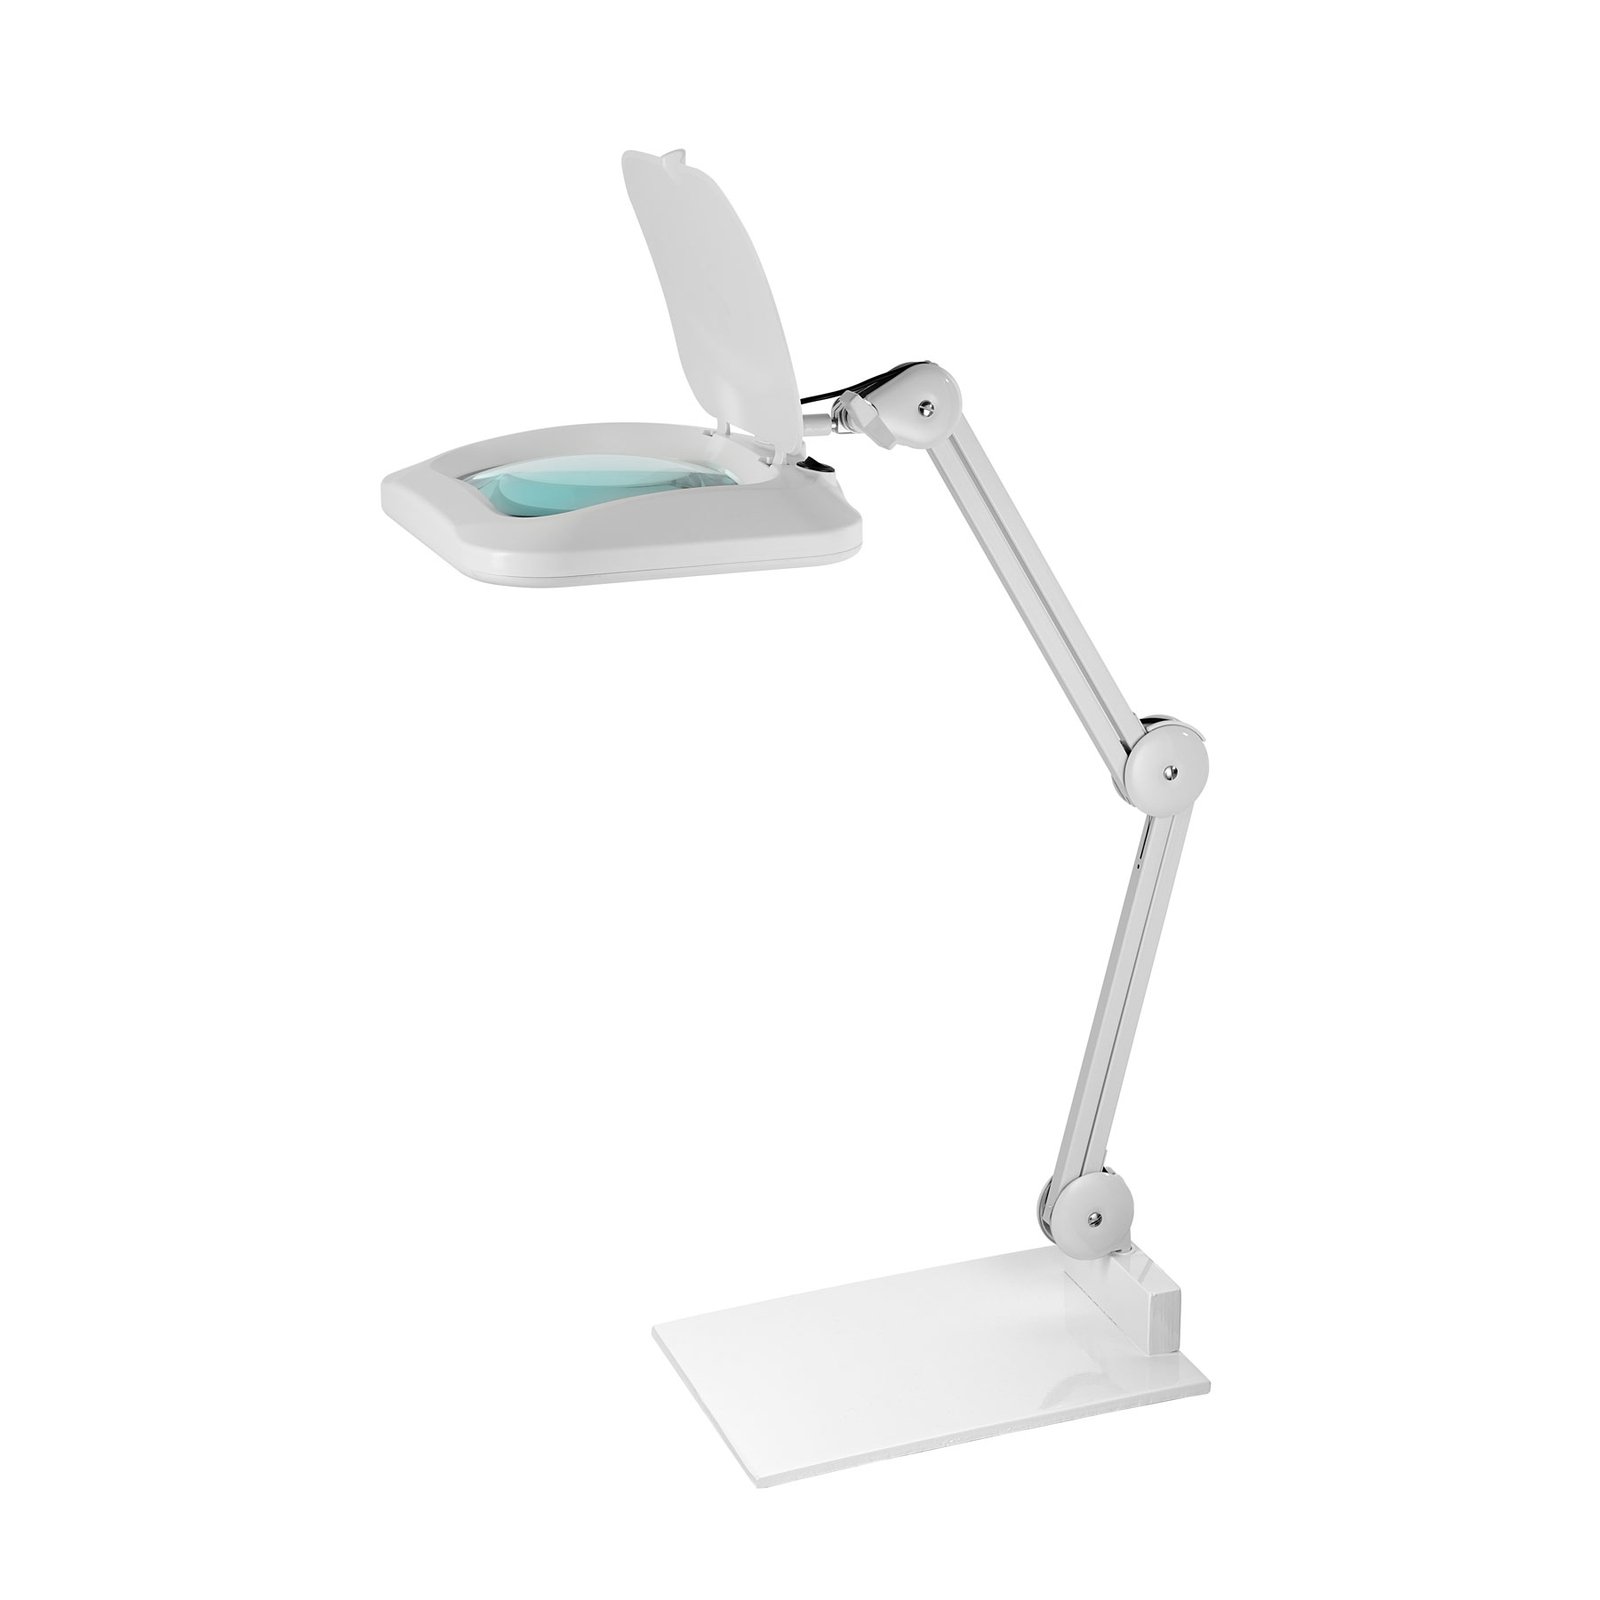 LED magnifying light 9226, 5 dioptres, base